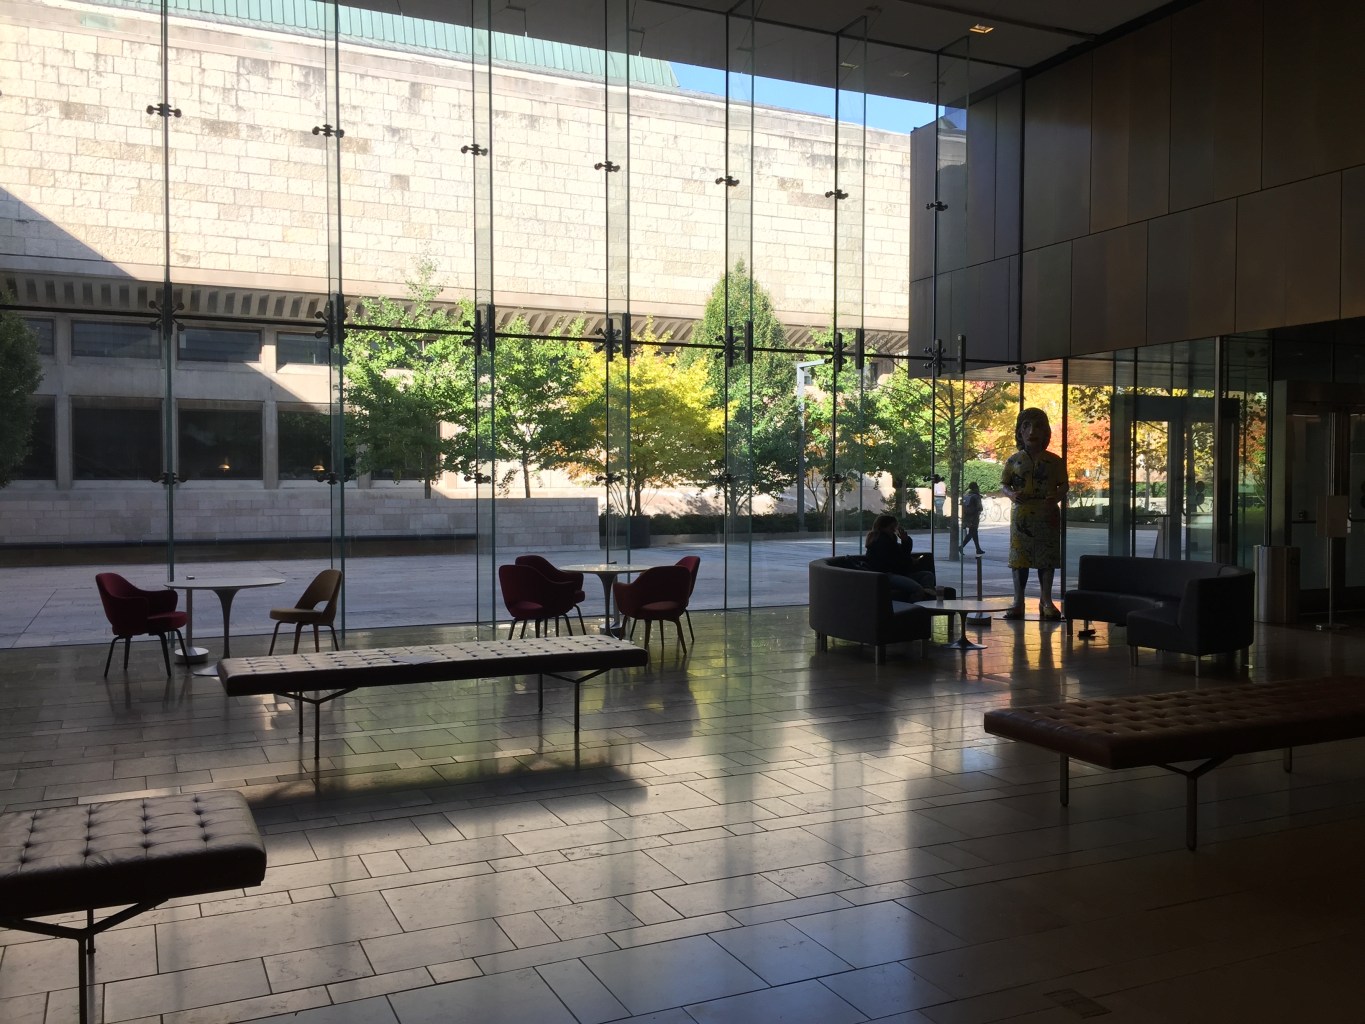 A lobby space with floor-to-ceiling glass walls and cafe-style tables and benches.